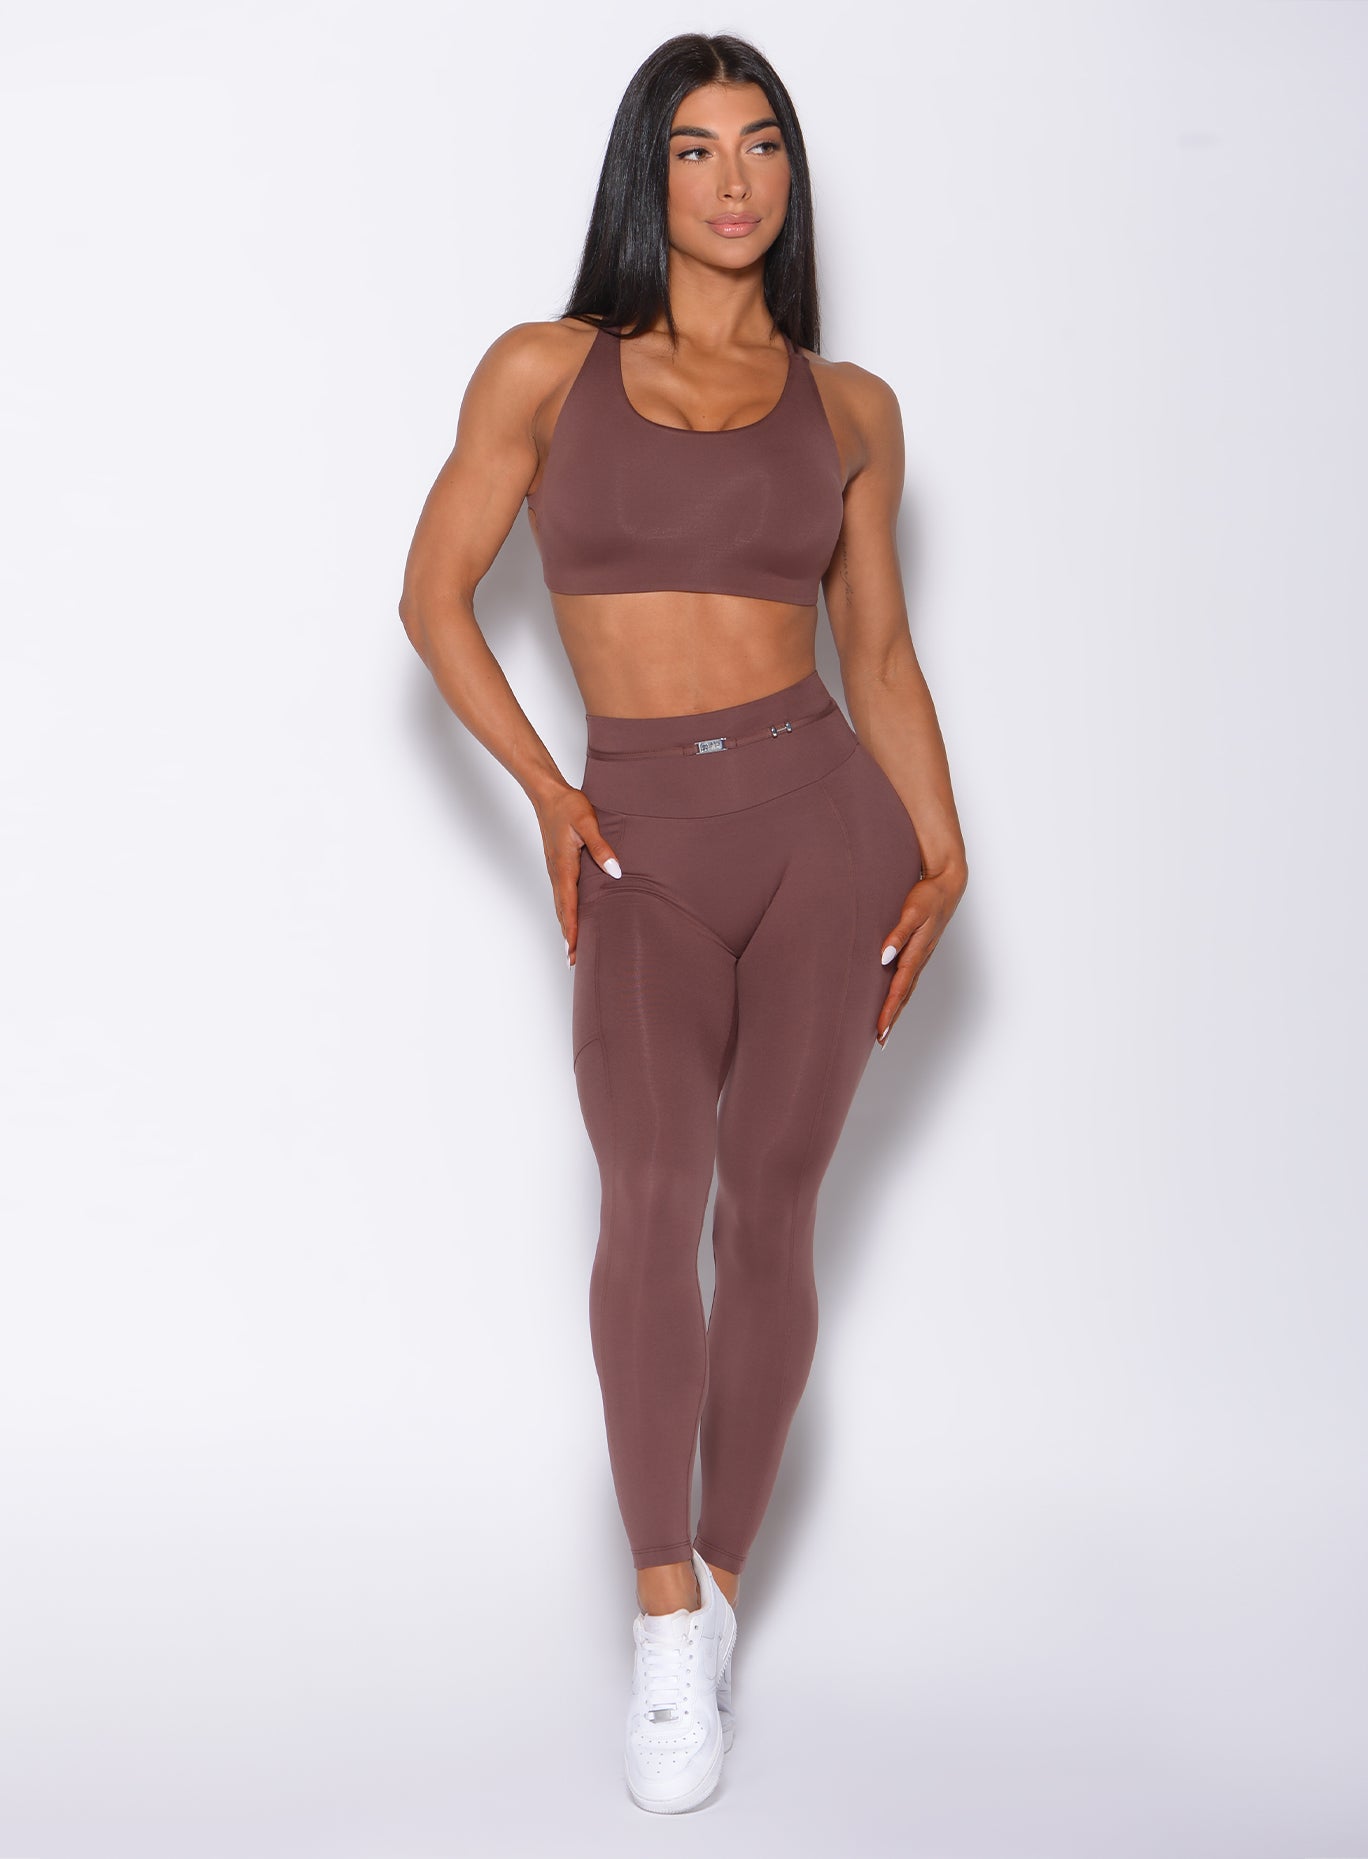 Front profile view of a model in our barbell leggings in chocolate color and a matching bra